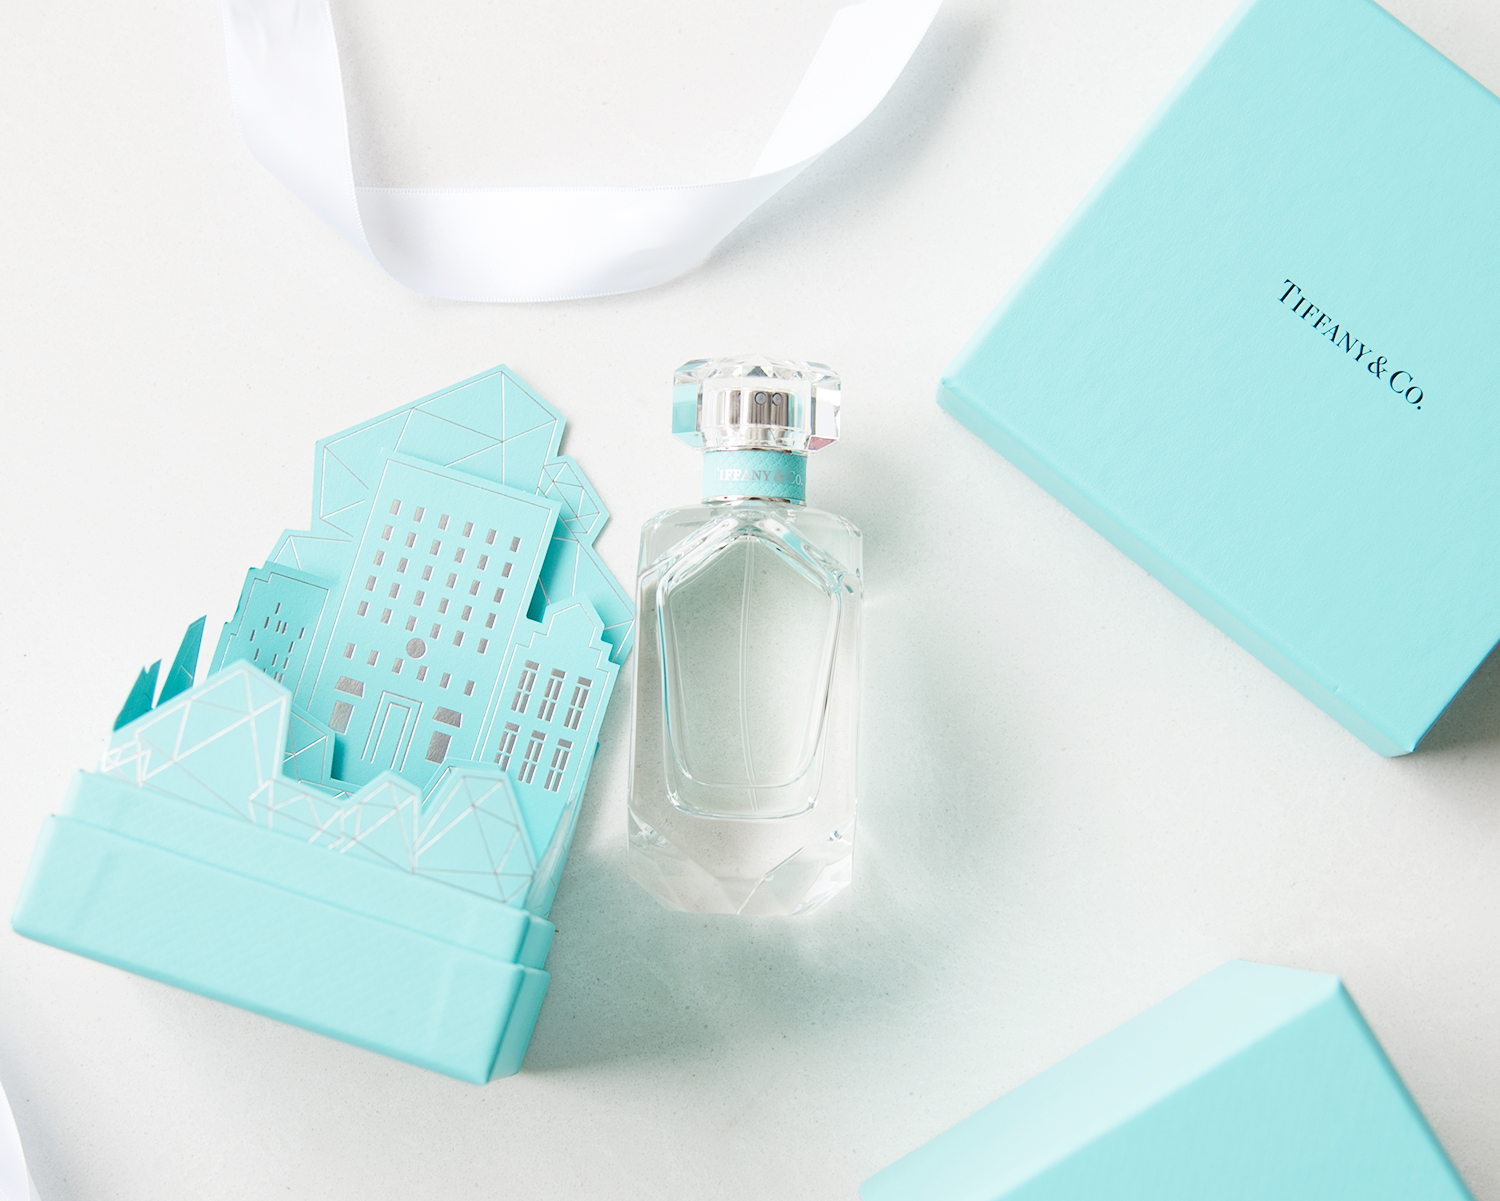 tiffany and co perfume limited edition